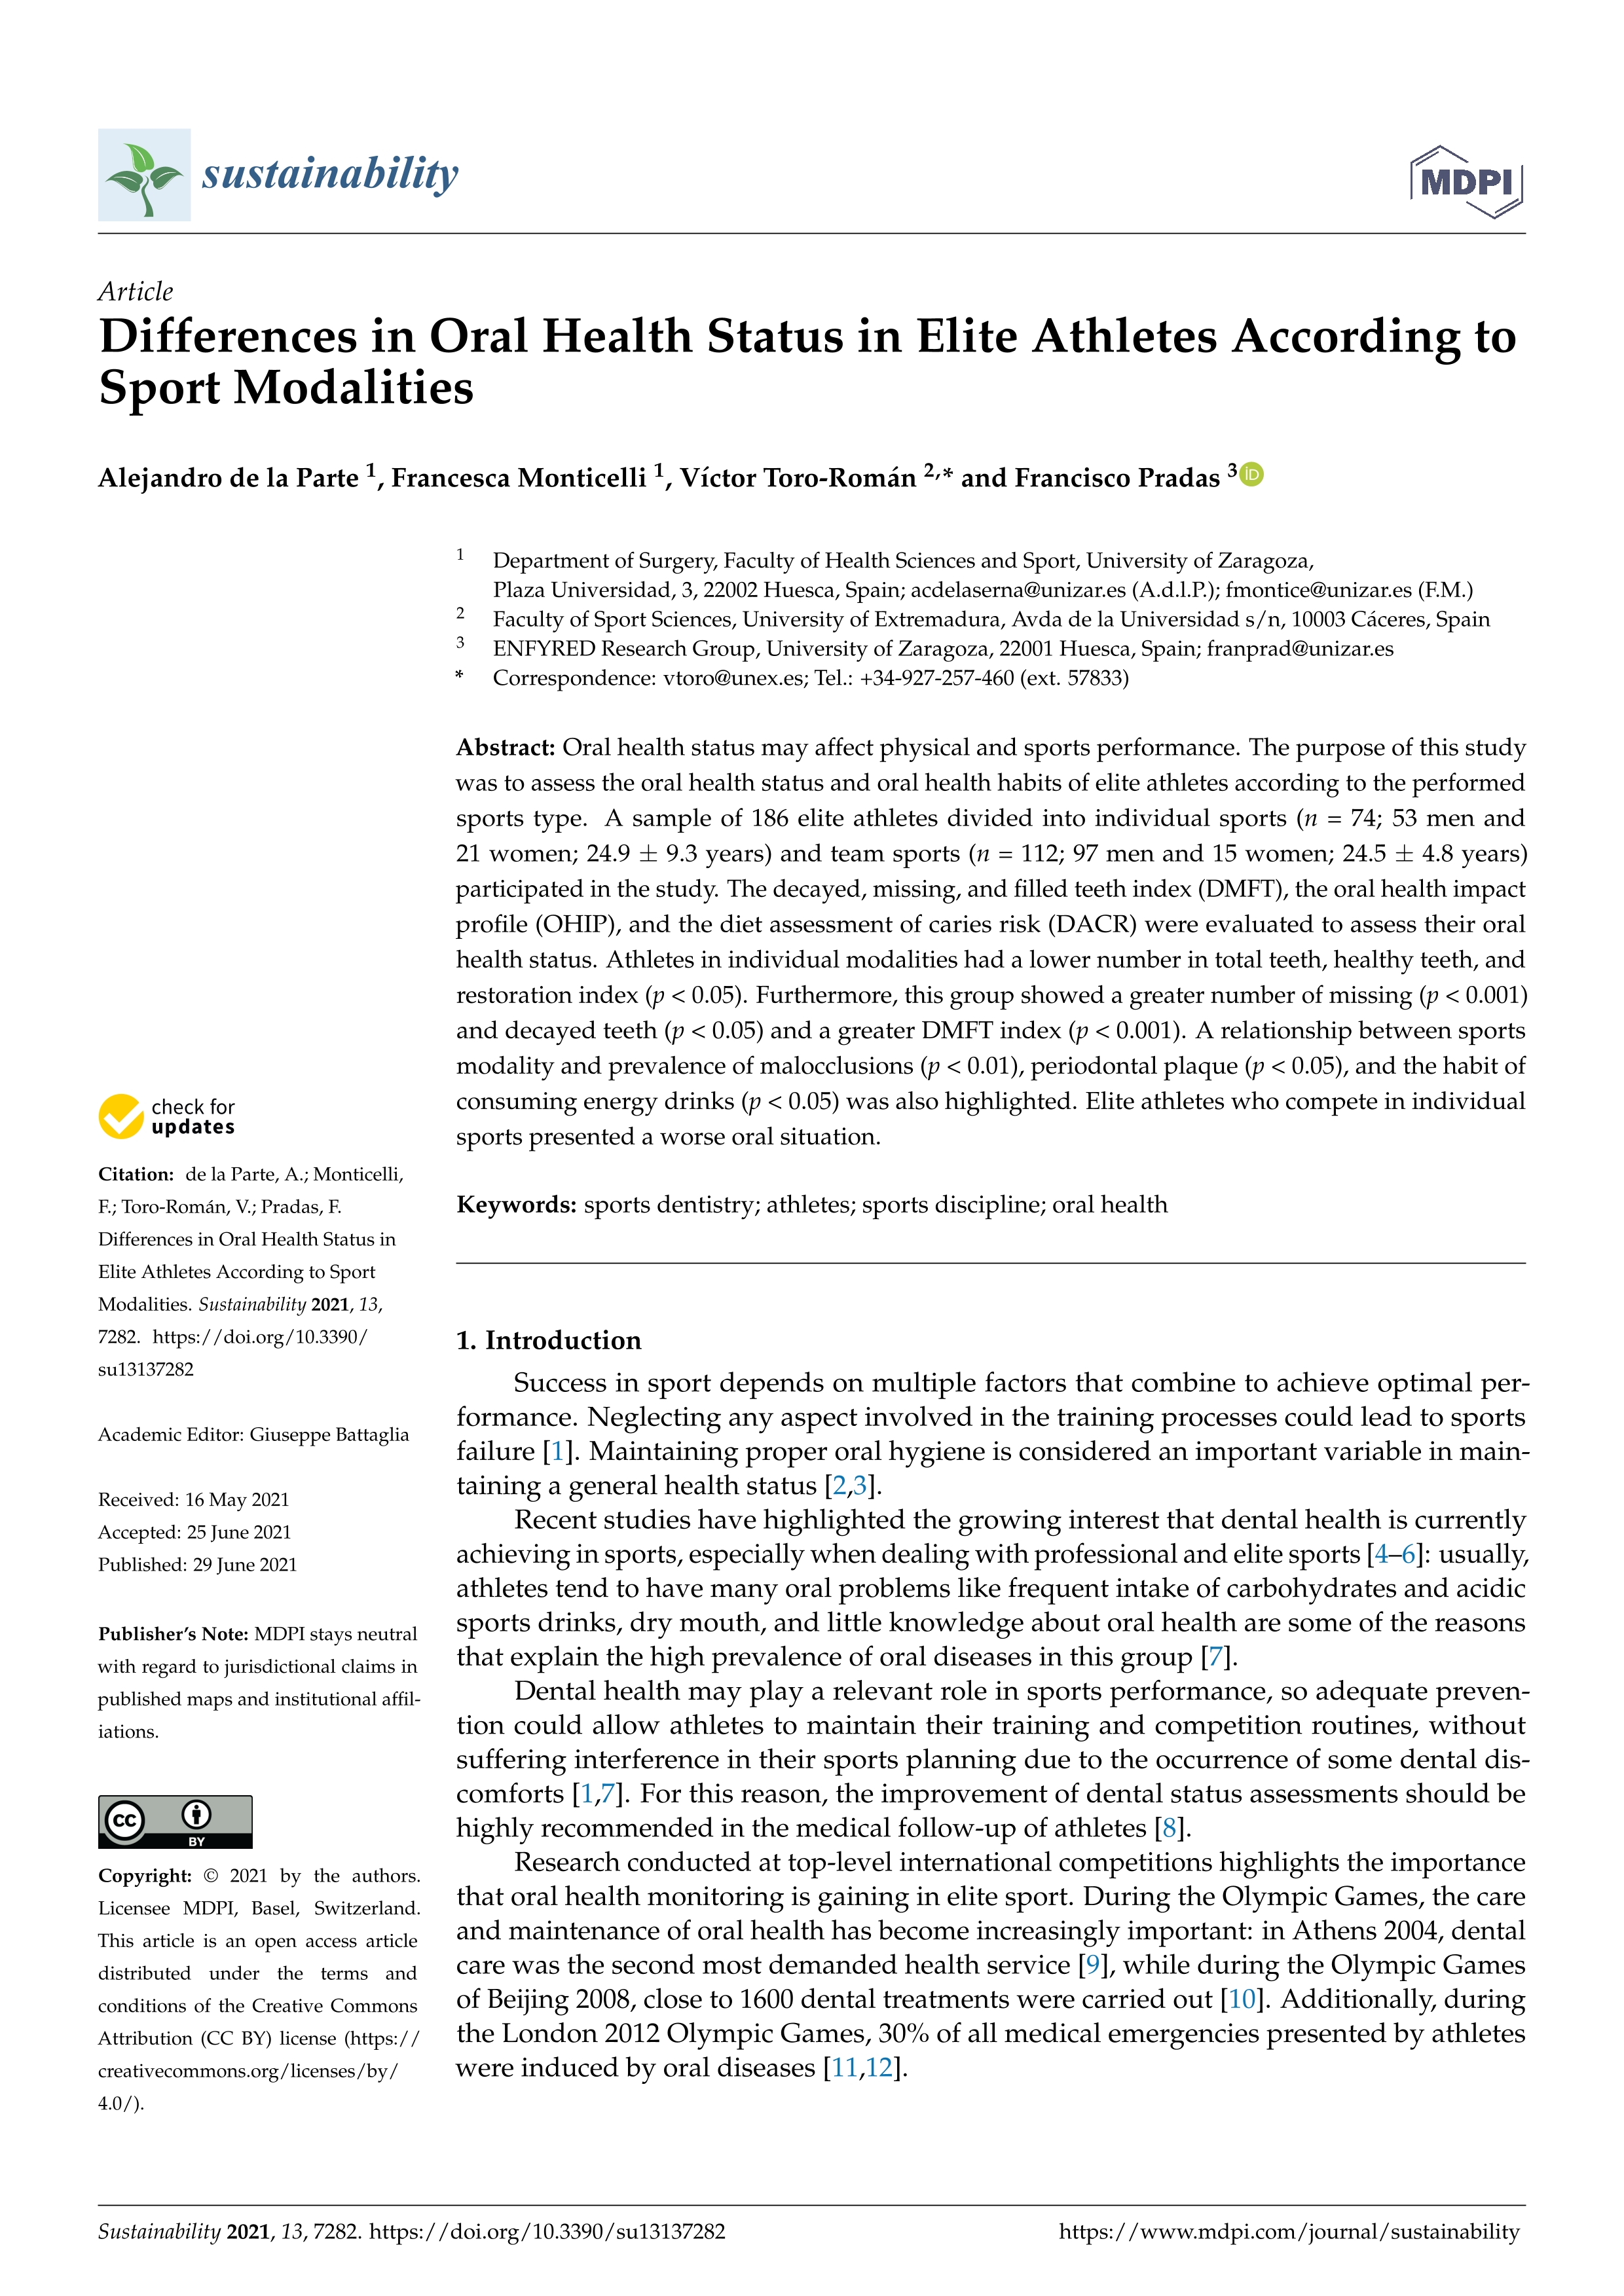 Differences in oral health status in elite athletes according to sport modalities